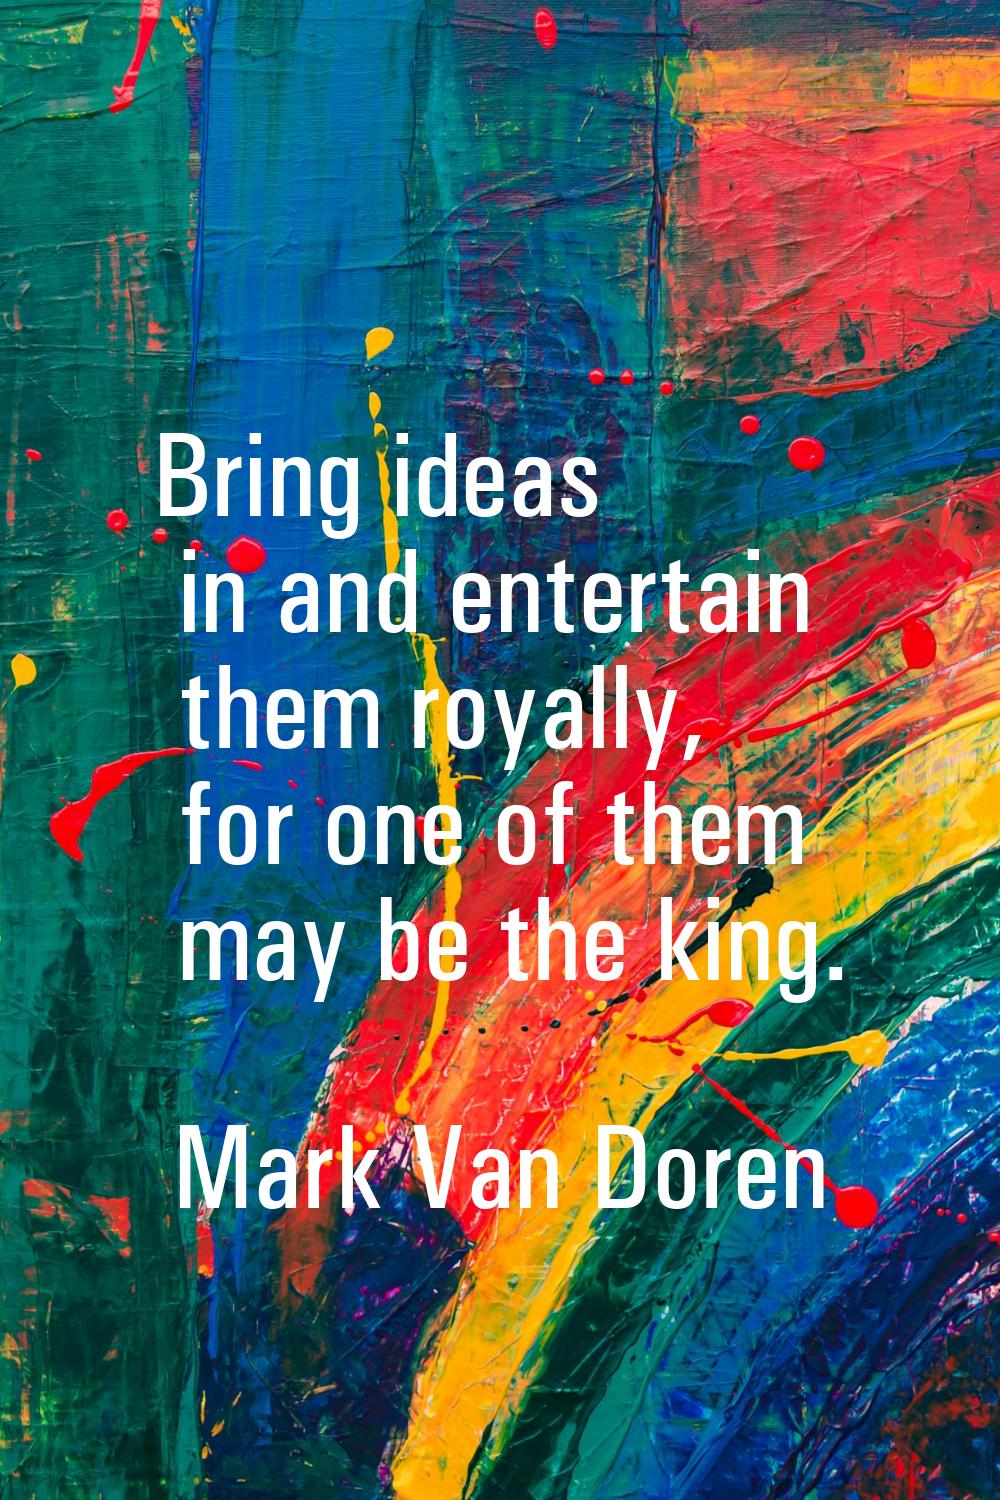 Bring ideas in and entertain them royally, for one of them may be the king.